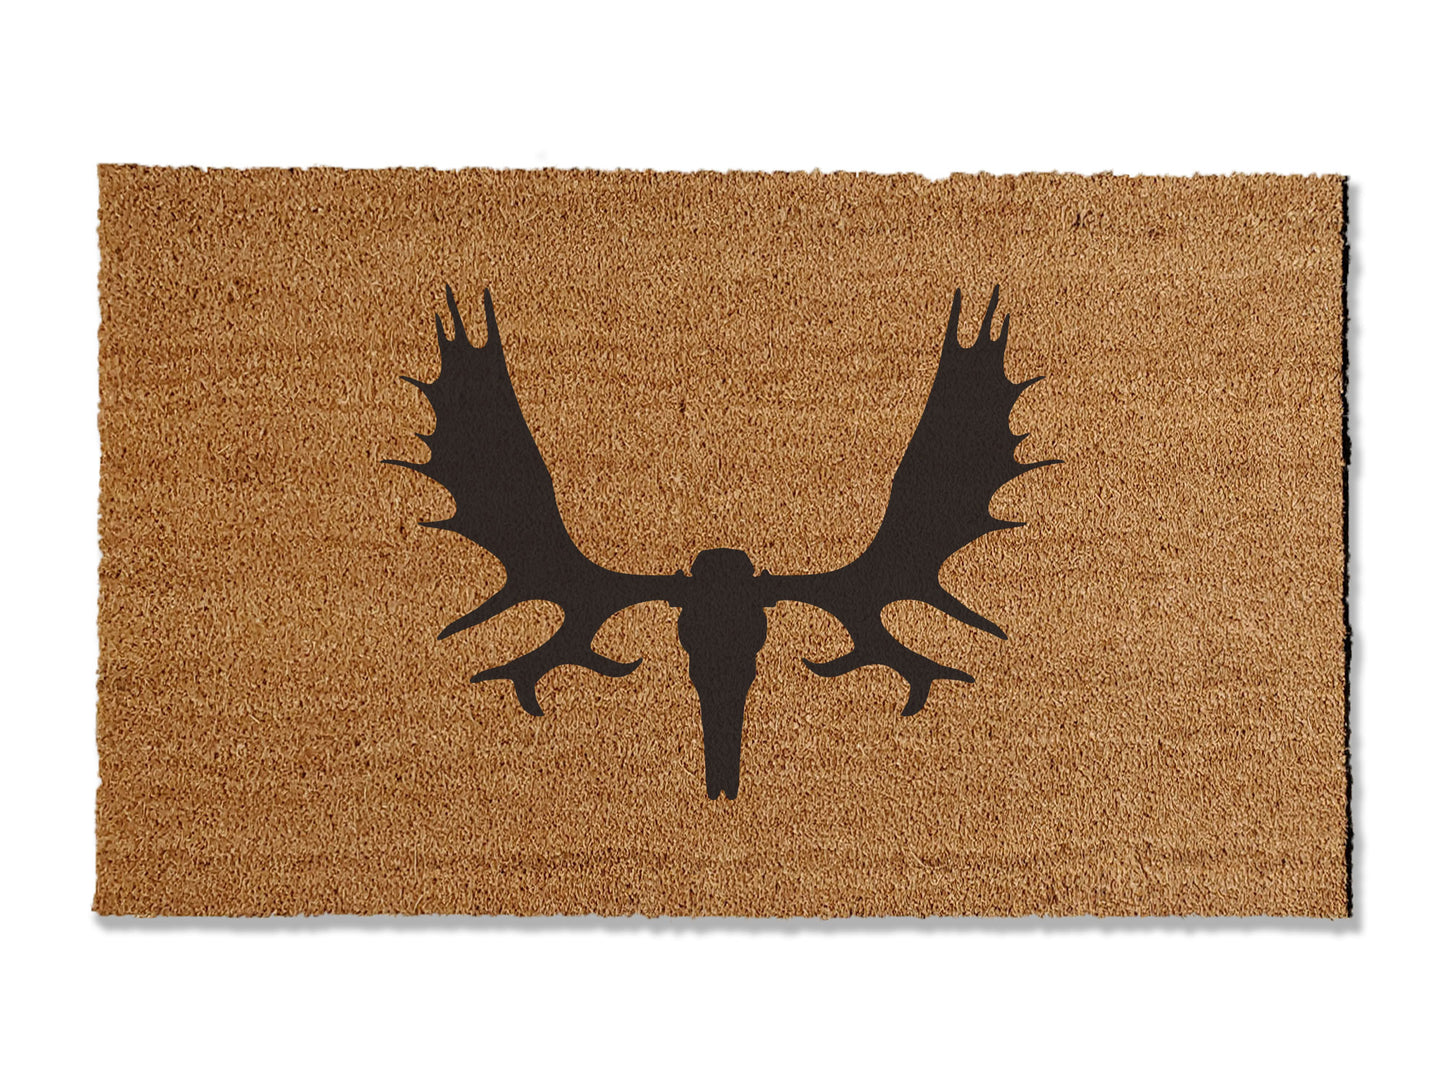 Add a rustic touch to your home or cabin entrance with our coir doormat featuring a moose skull design. Perfect for those seeking a rustic aesthetic, this unique mat is available in multiple sizes. Beyond its distinctive appearance, it excels at trapping dirt, making it a practical and stylish addition to enhance your entryway.